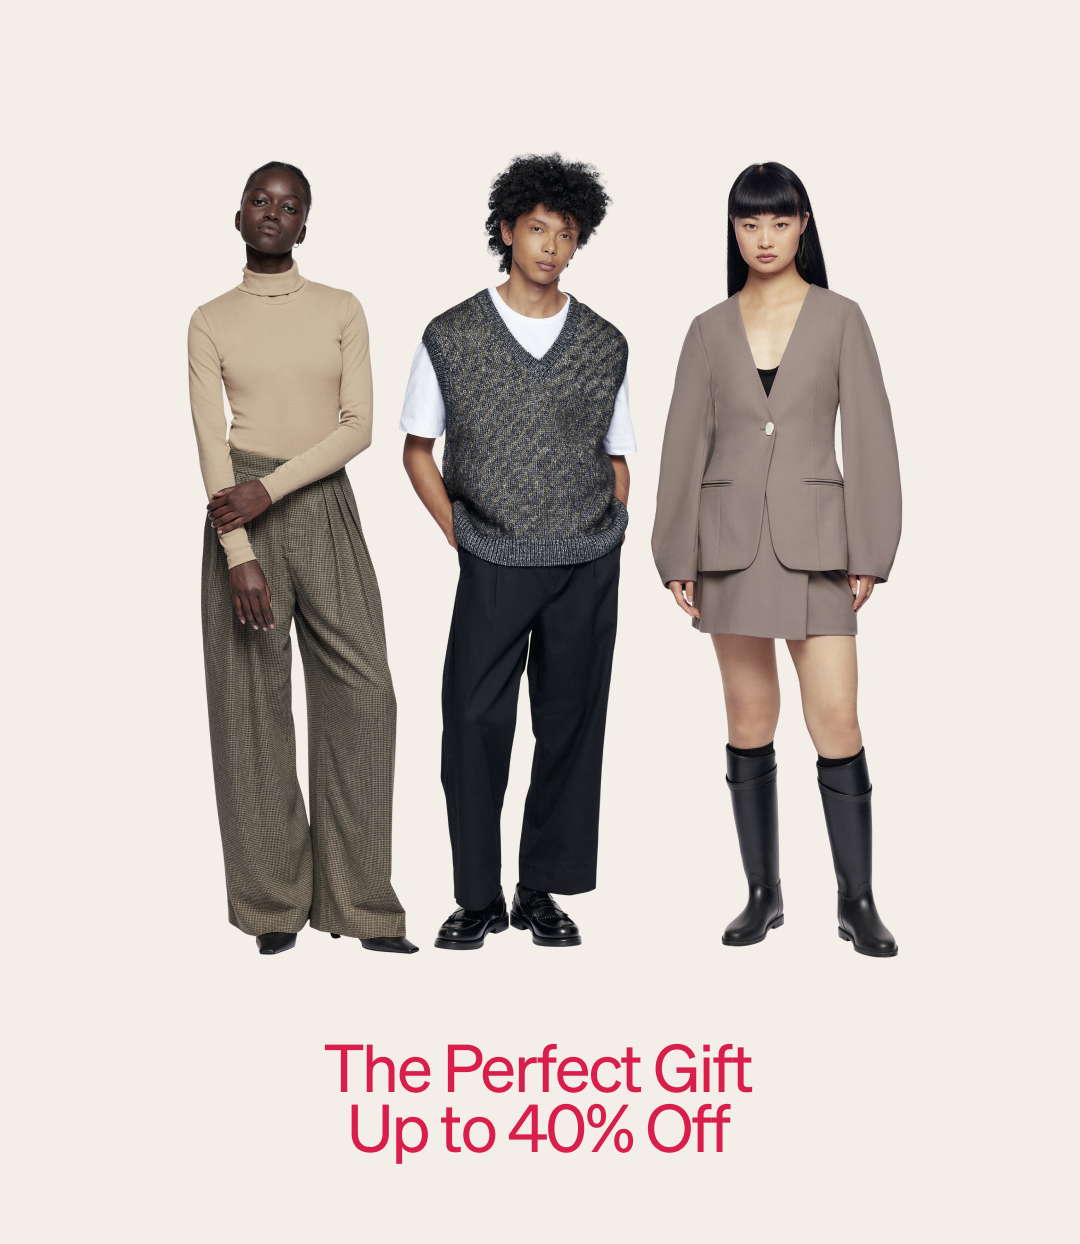 The Perfect Gift Up to 40% Off